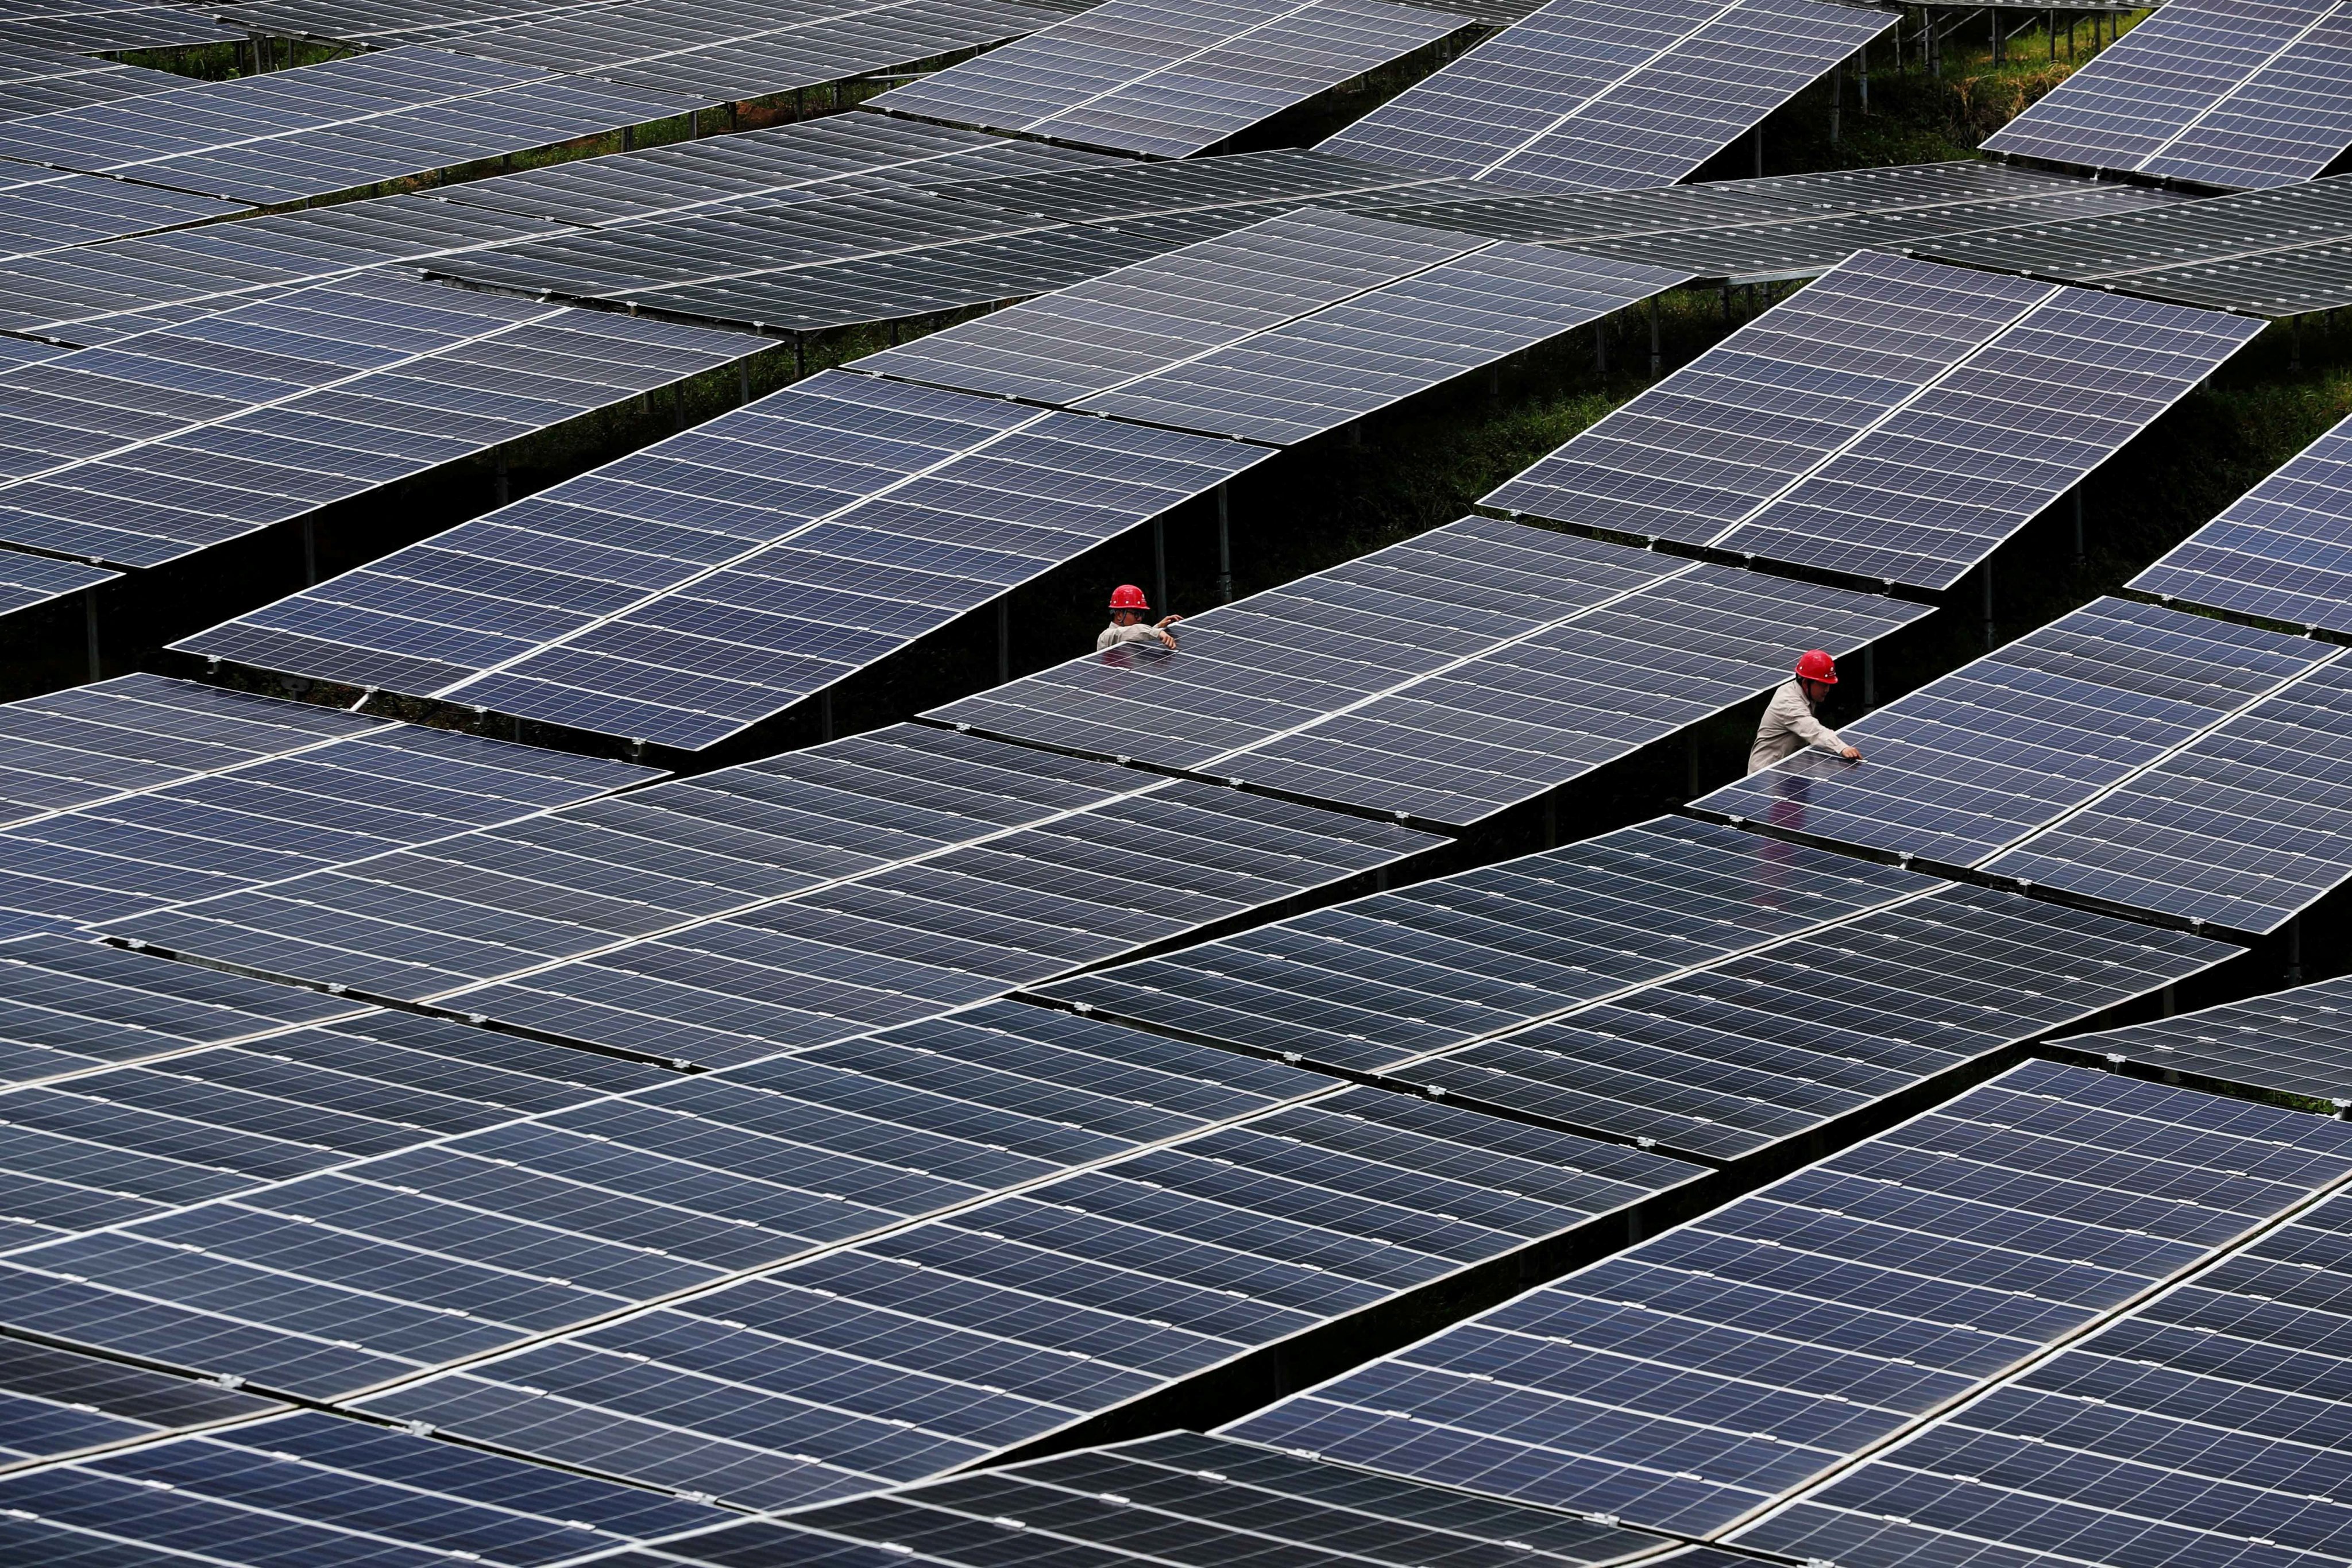 The country will need to raise about 140 trillion yuan from green bonds and other environmentally friendly funding tools to become carbon neutral by 2060. Photo: Reuters